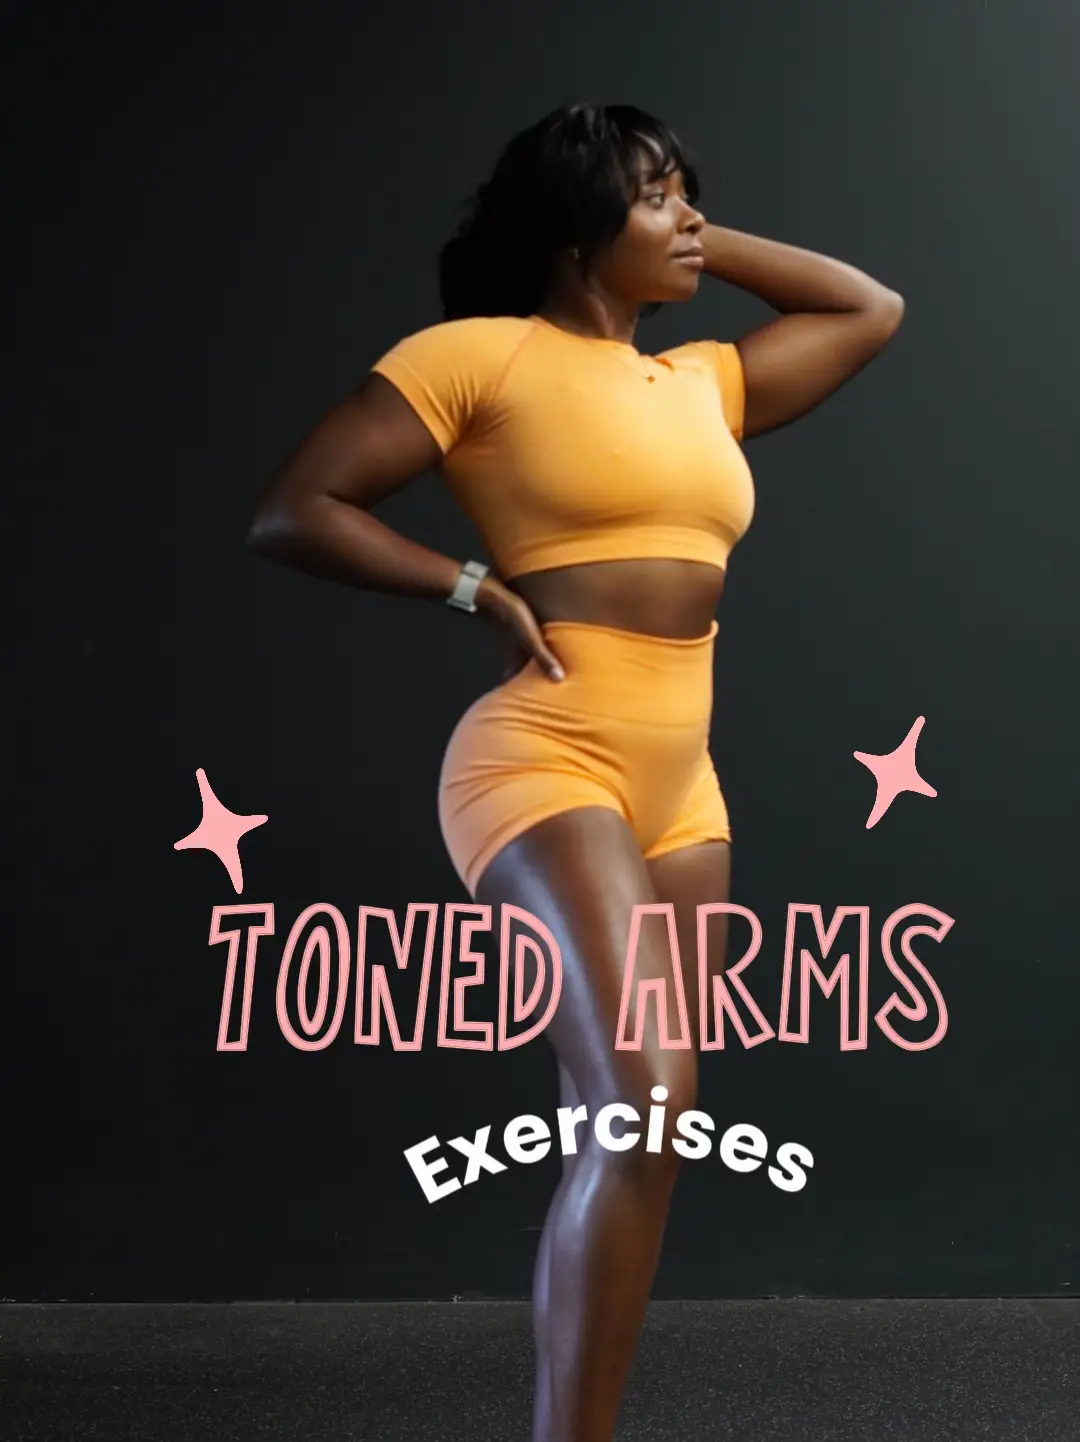 Do you want toned arms? Then do this 3 times a week 🔥💪🏽. Only